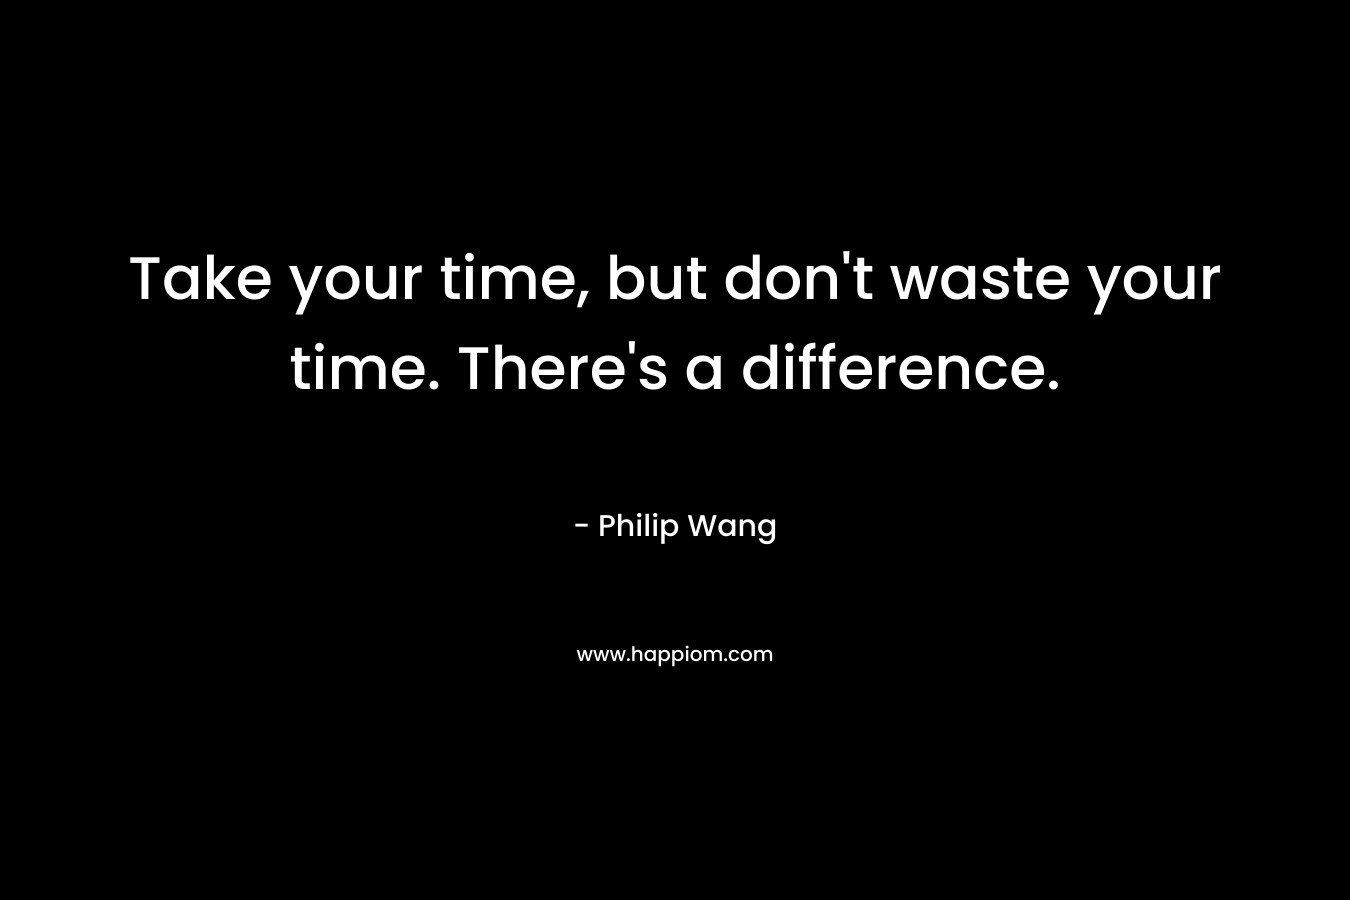 Take your time, but don't waste your time. There's a difference.